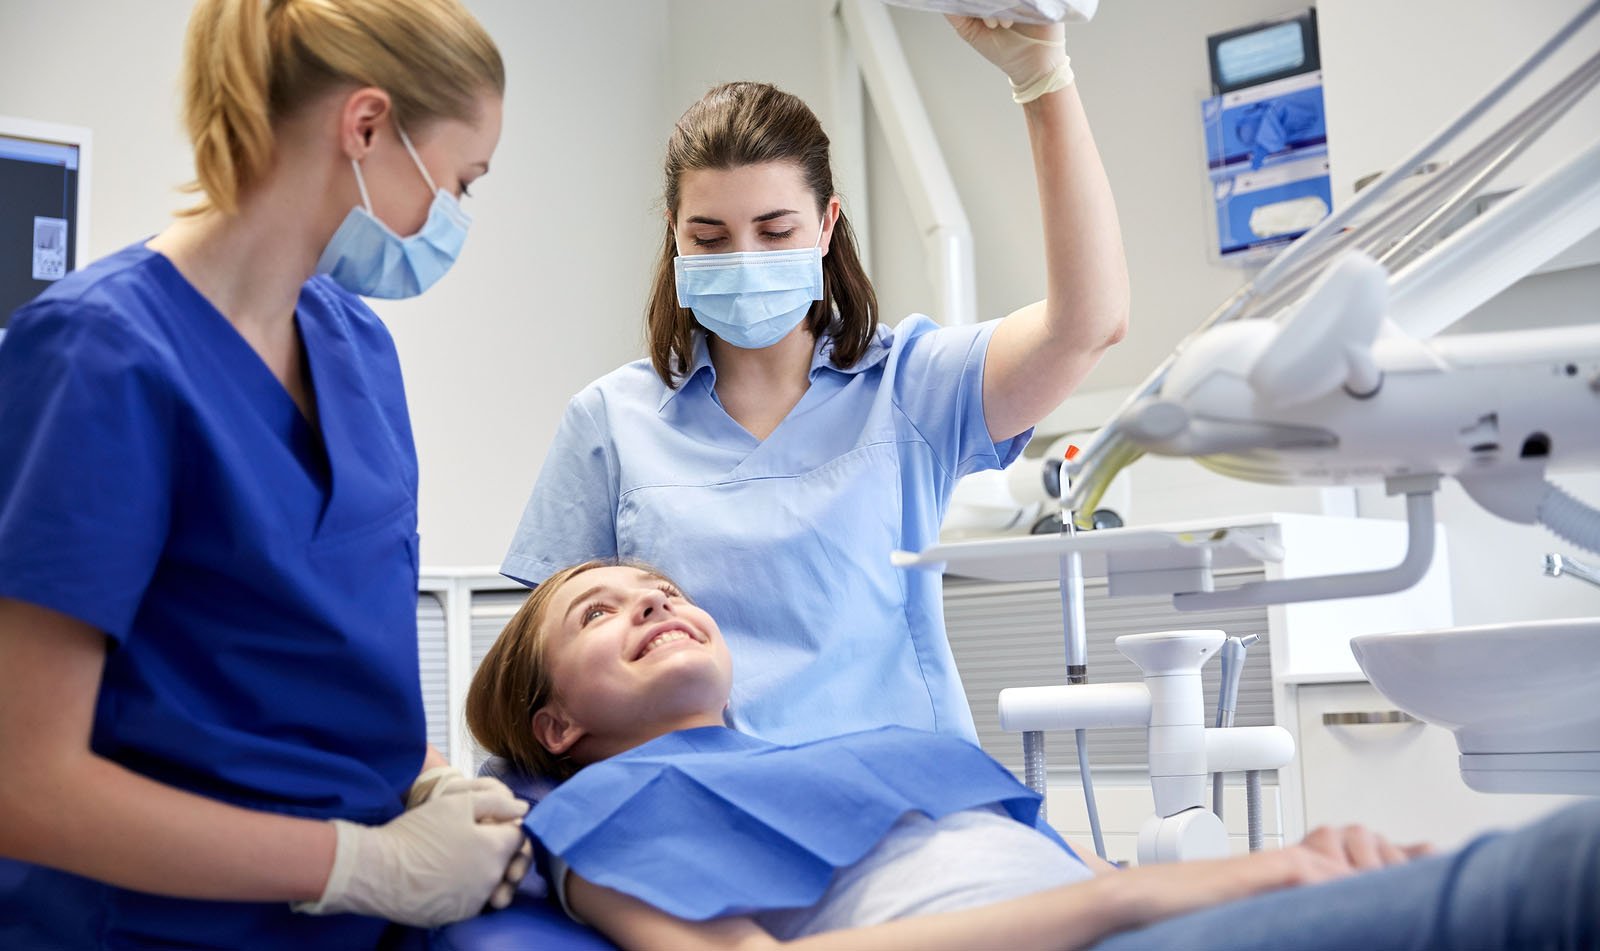 The 5 Things You Should Know Before You Buy Dental Insurance